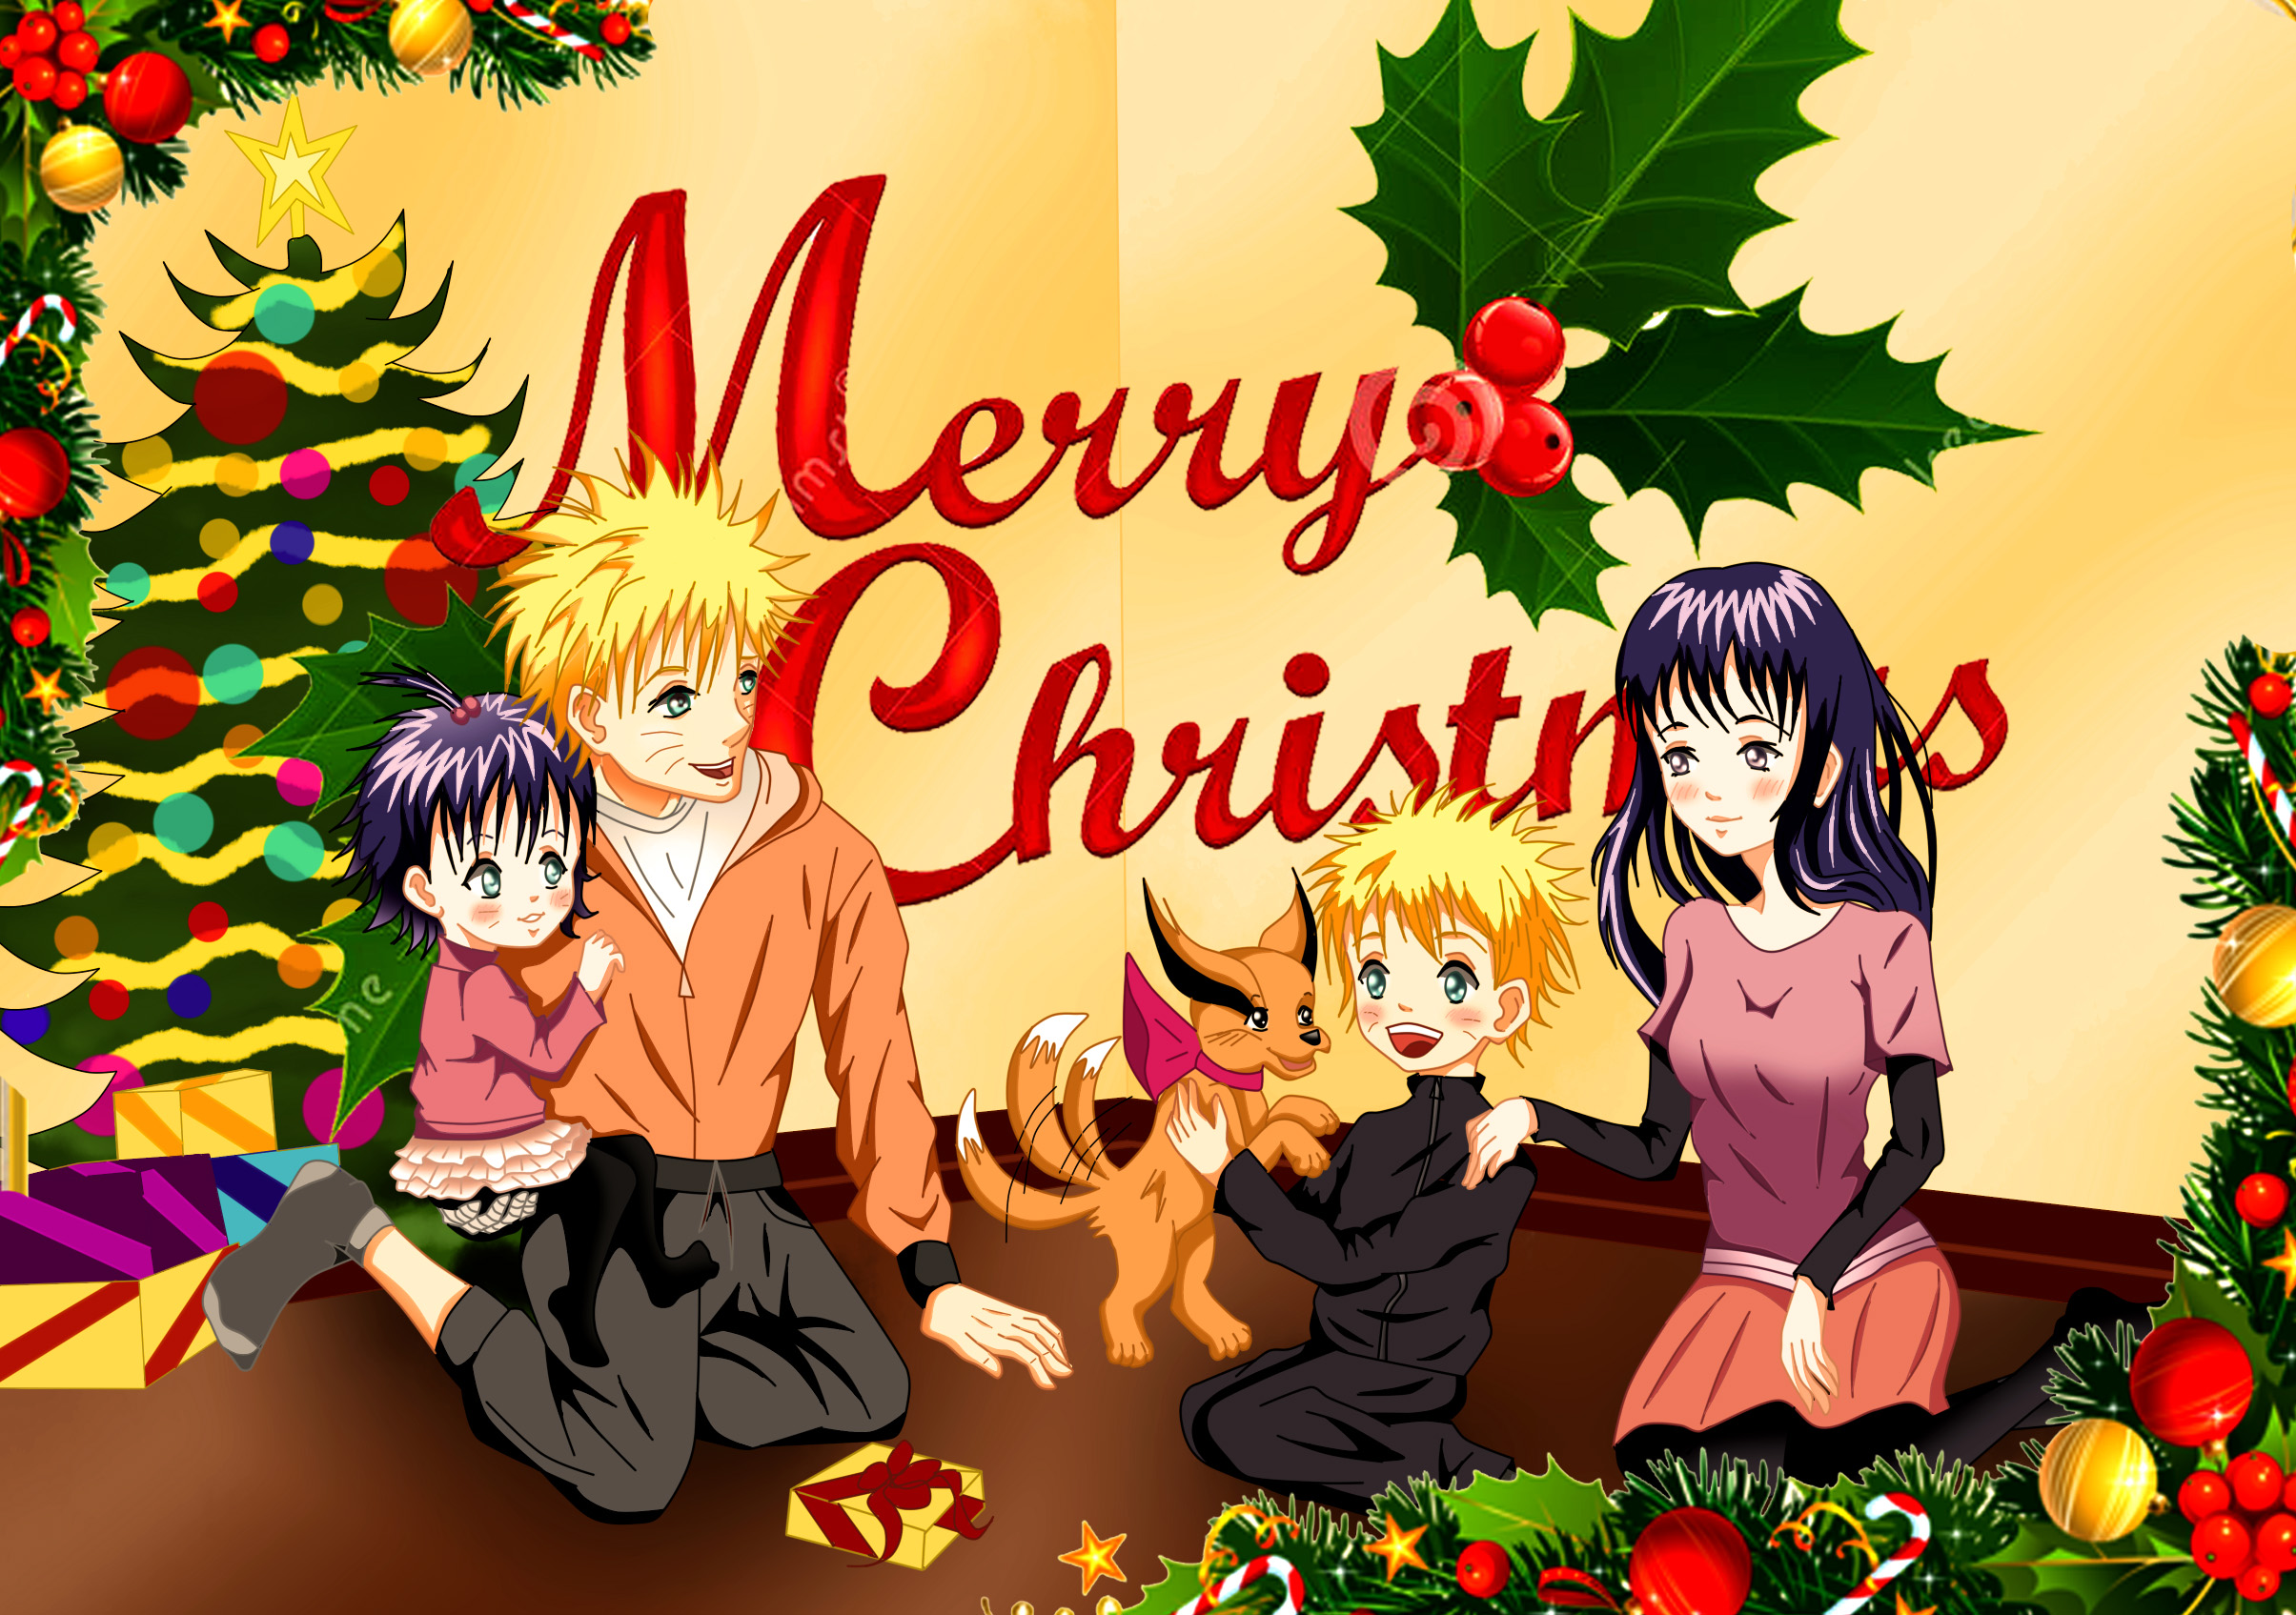 Naruto Christmas by volcanicmind on DeviantArt